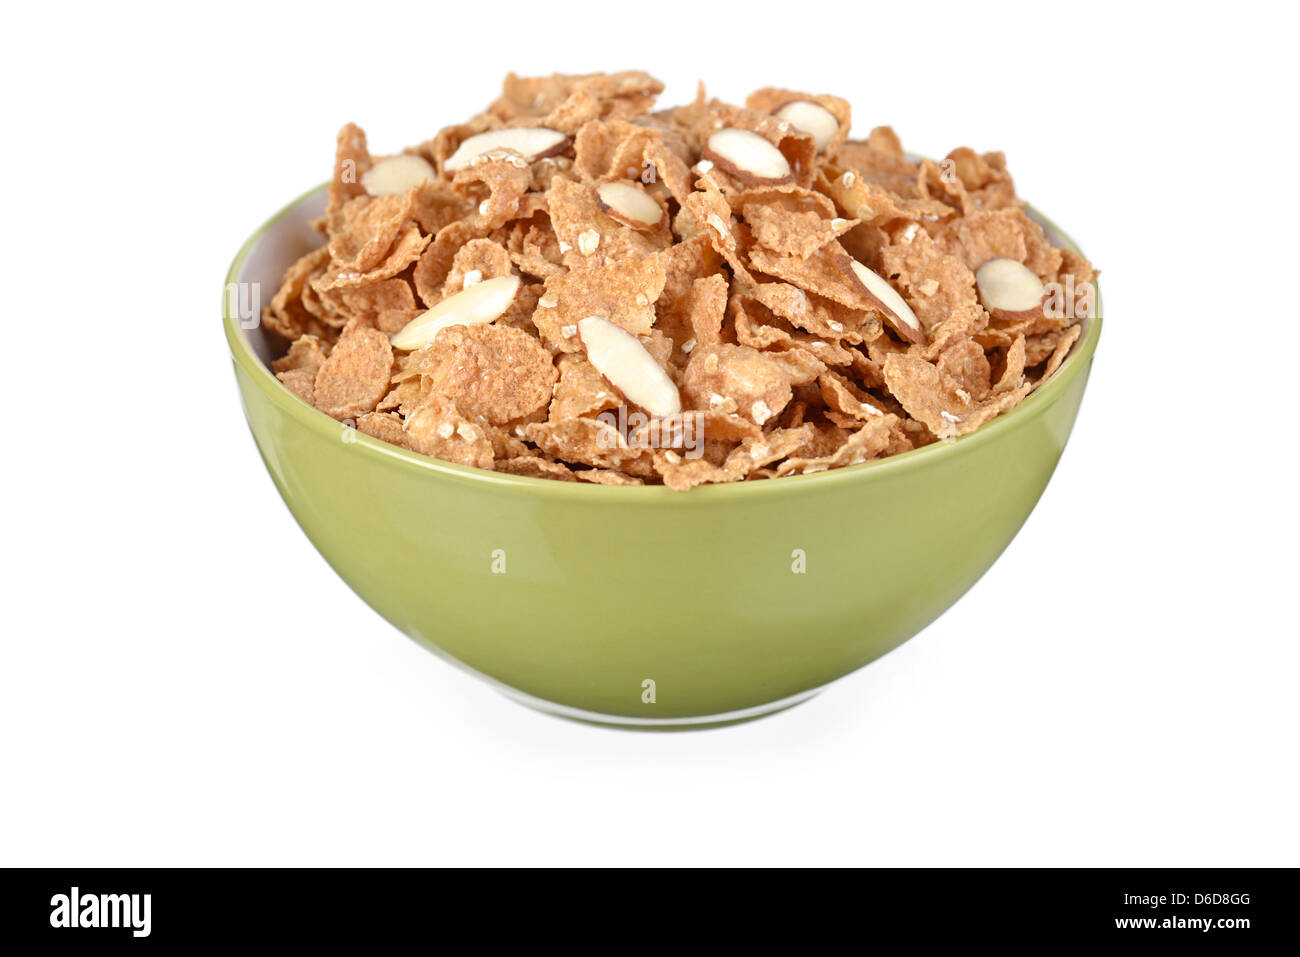 Cereal, Breakfast Cereal Flakes with Almonds Stock Photo